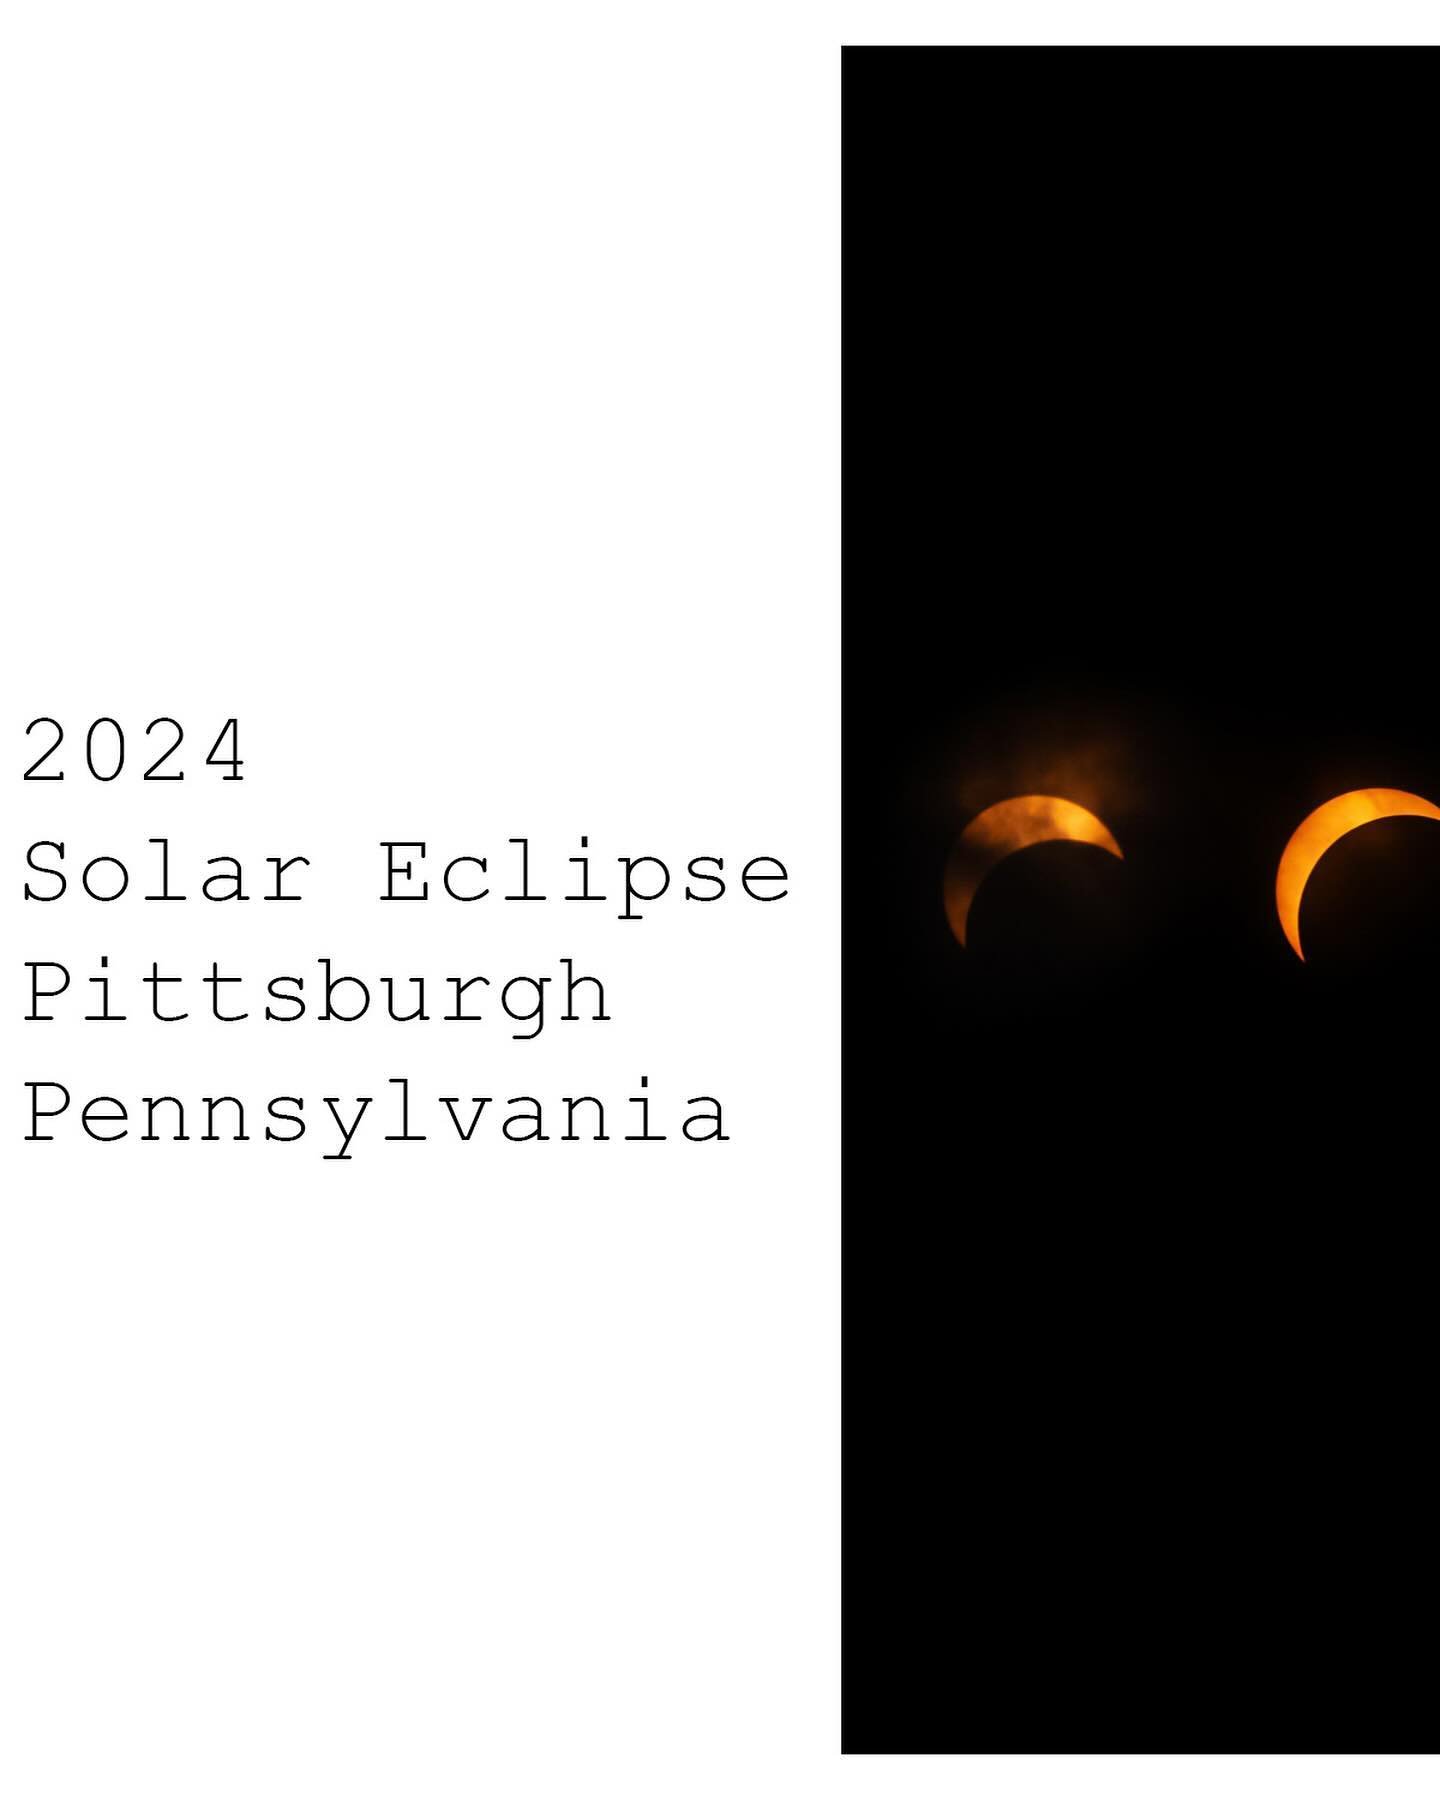 Did you step outside to see the solar eclipse today? Even if you weren&rsquo;t in totality, it was incredible to see the change in the light and temperature.
.
#eclipse #2024eclipse #pa #pittsburgh #pgh #412 #photography #nature #solareclipse #nature